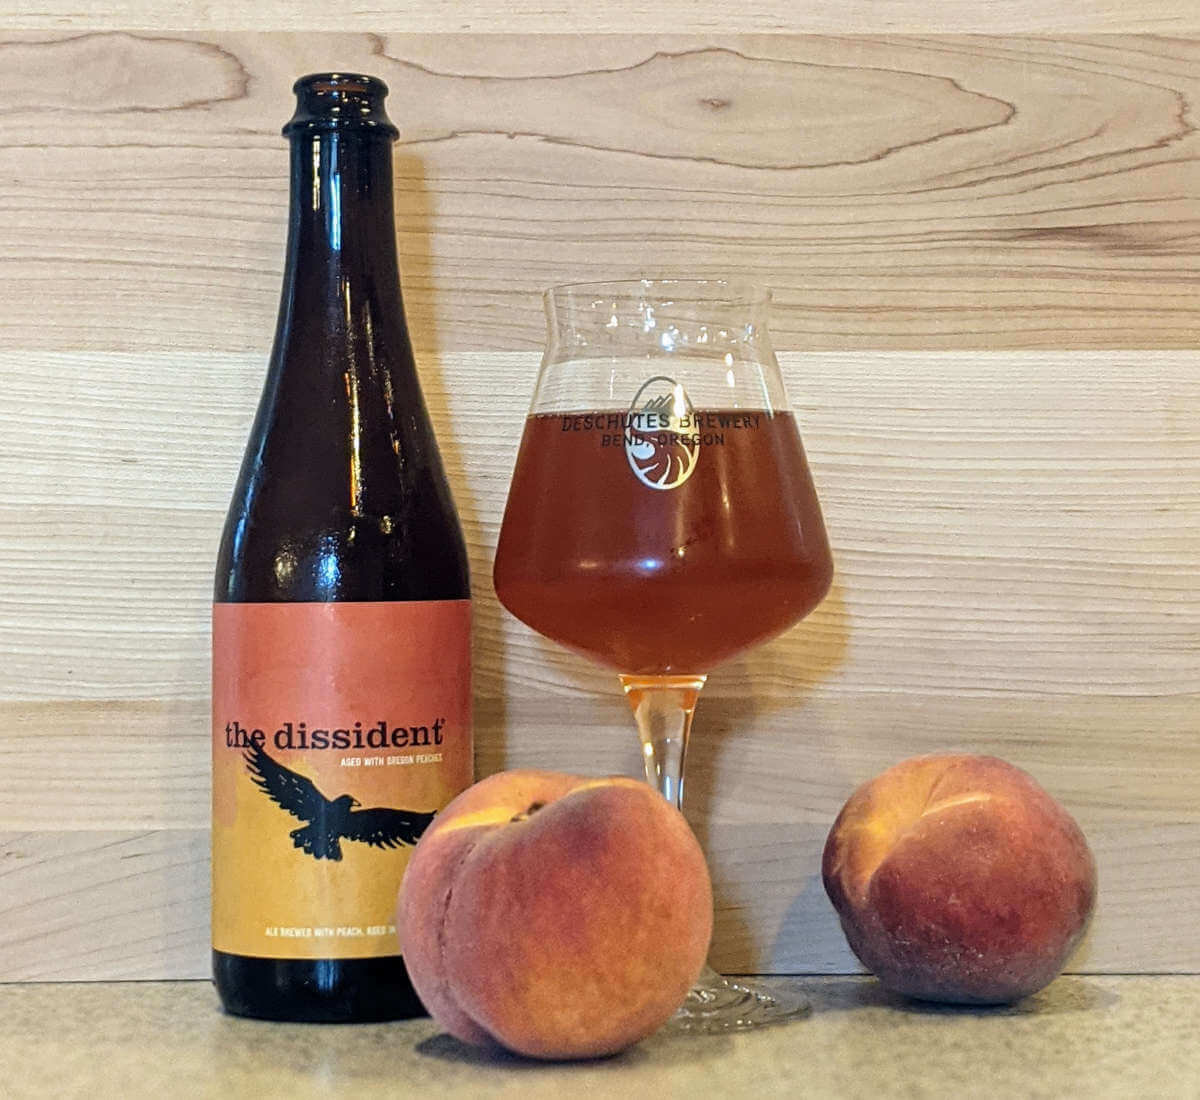 Latest print article: Profiling Deschutes Brewery’s Peach Dissident